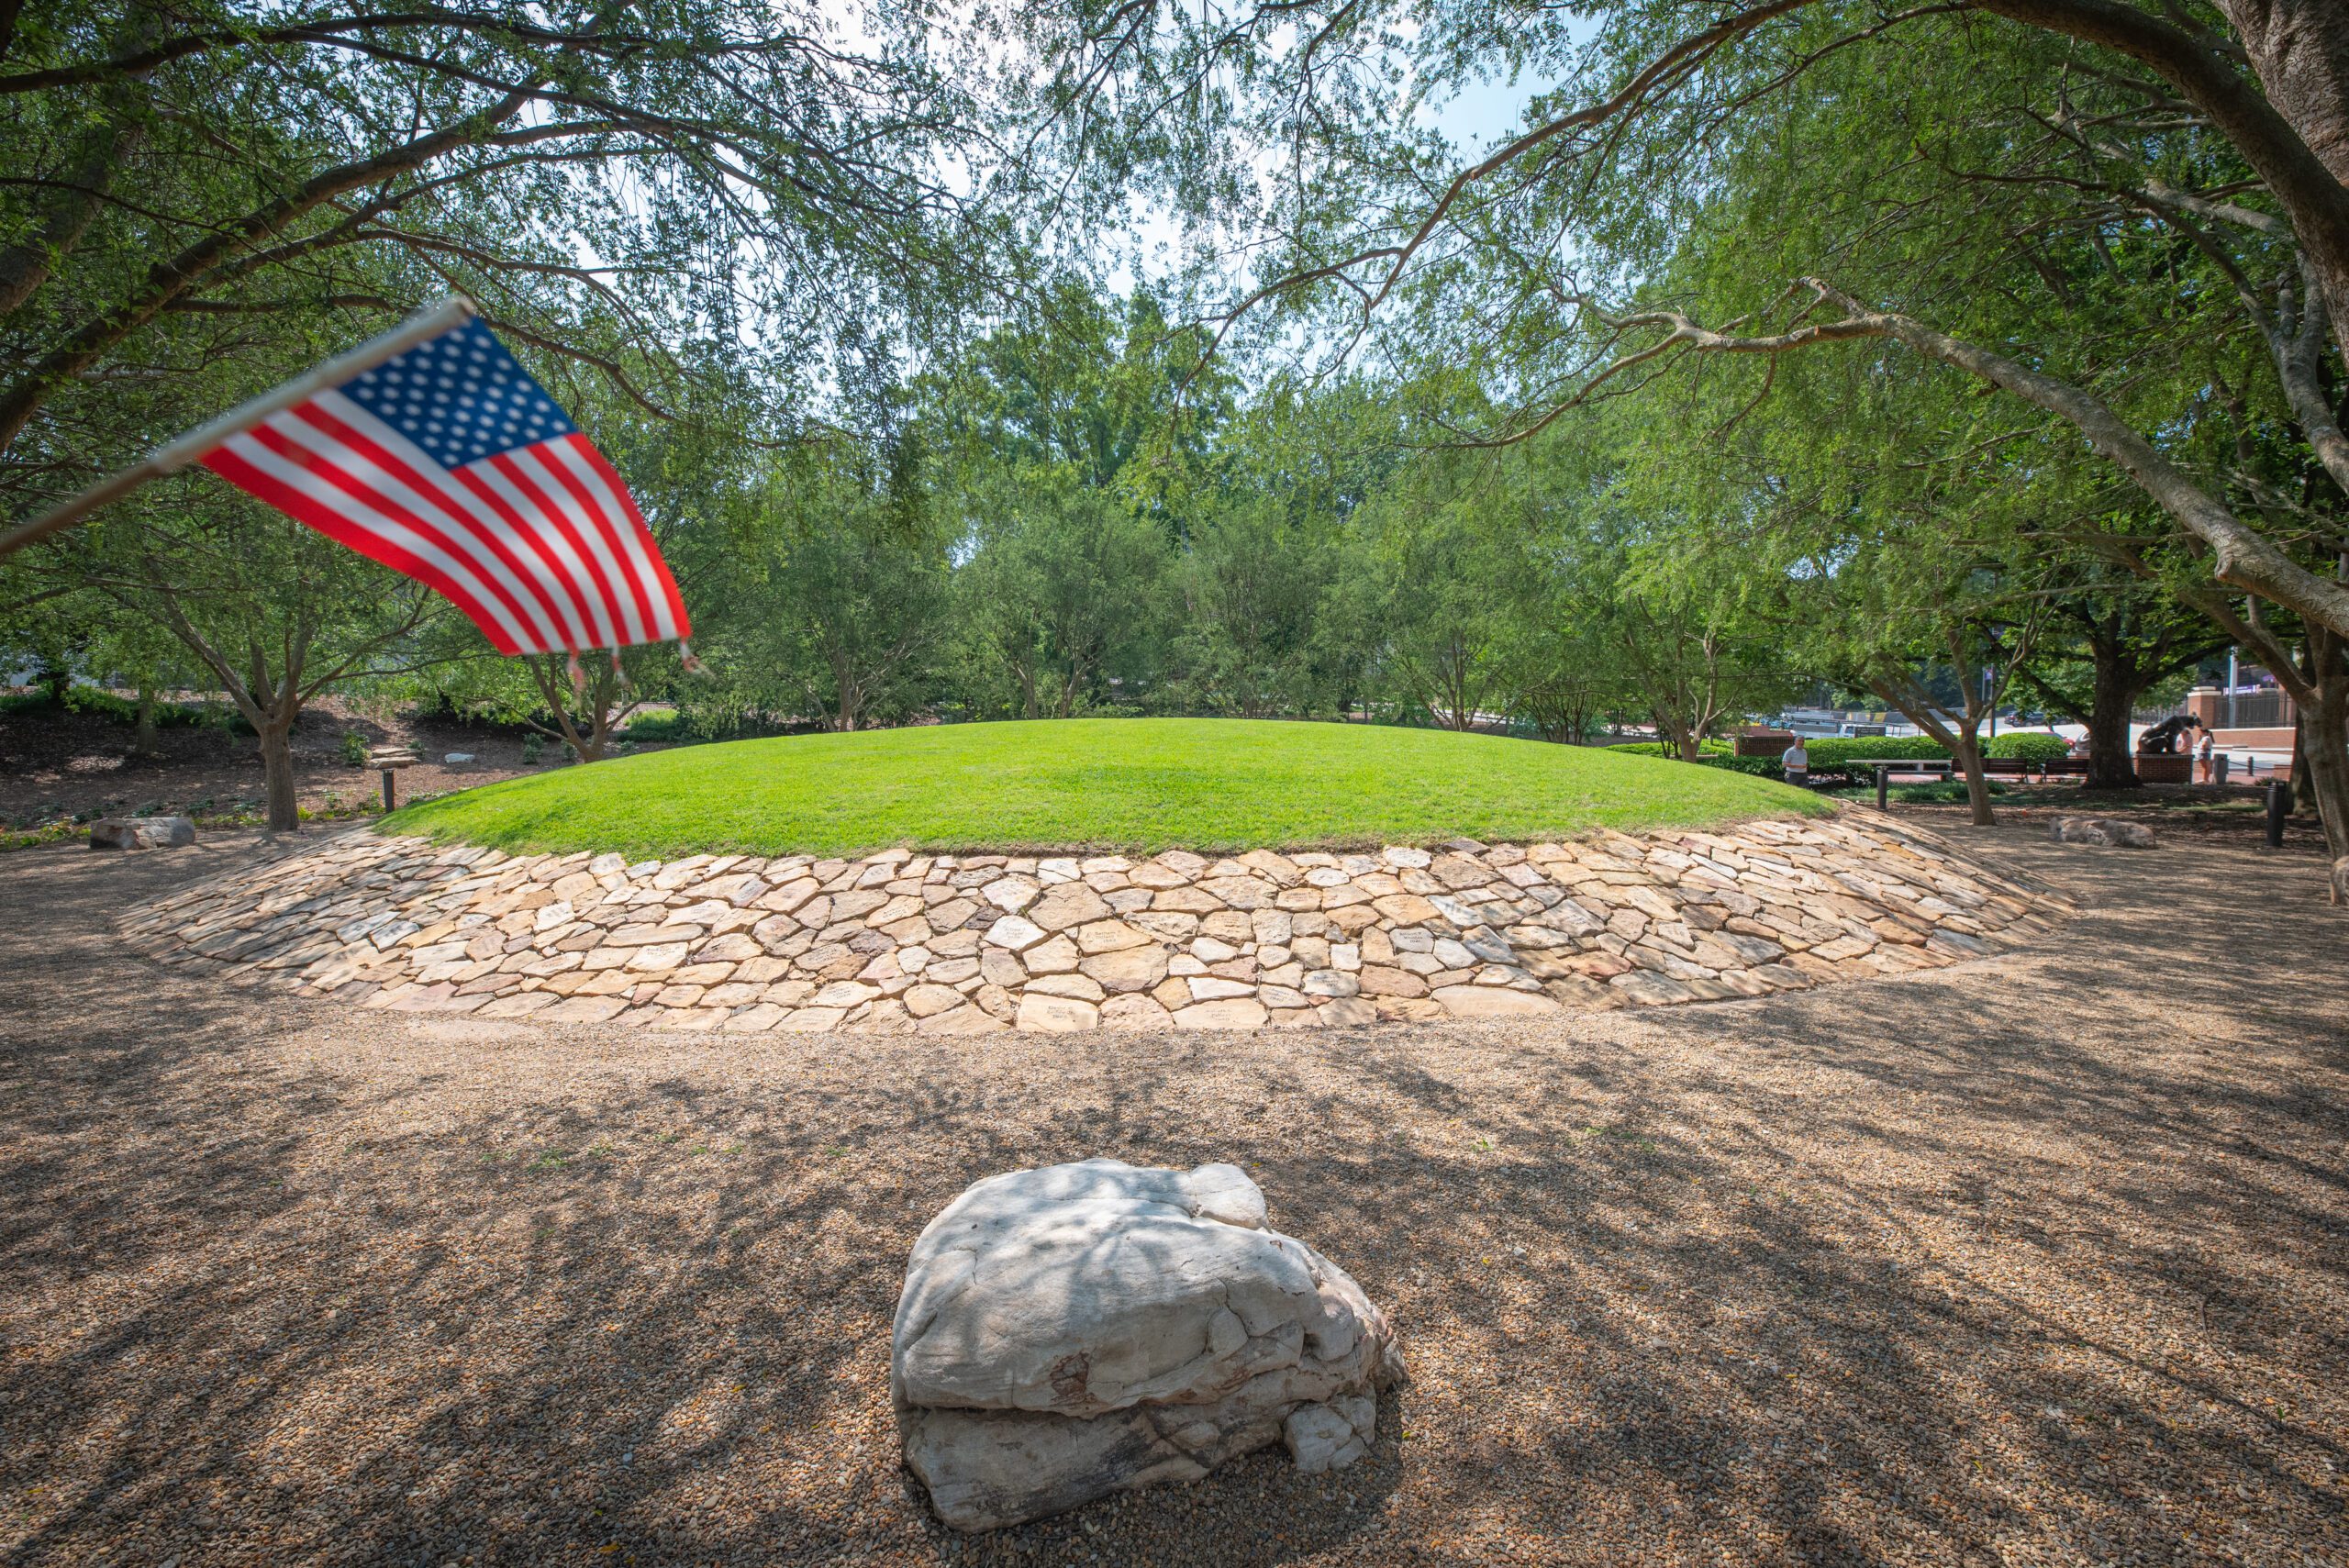 An American flag blows in the upper left corner of the frame in front of a mound ringed by rocks and topped by thick green glass, immaculately manicured, sits amid rows of trees.